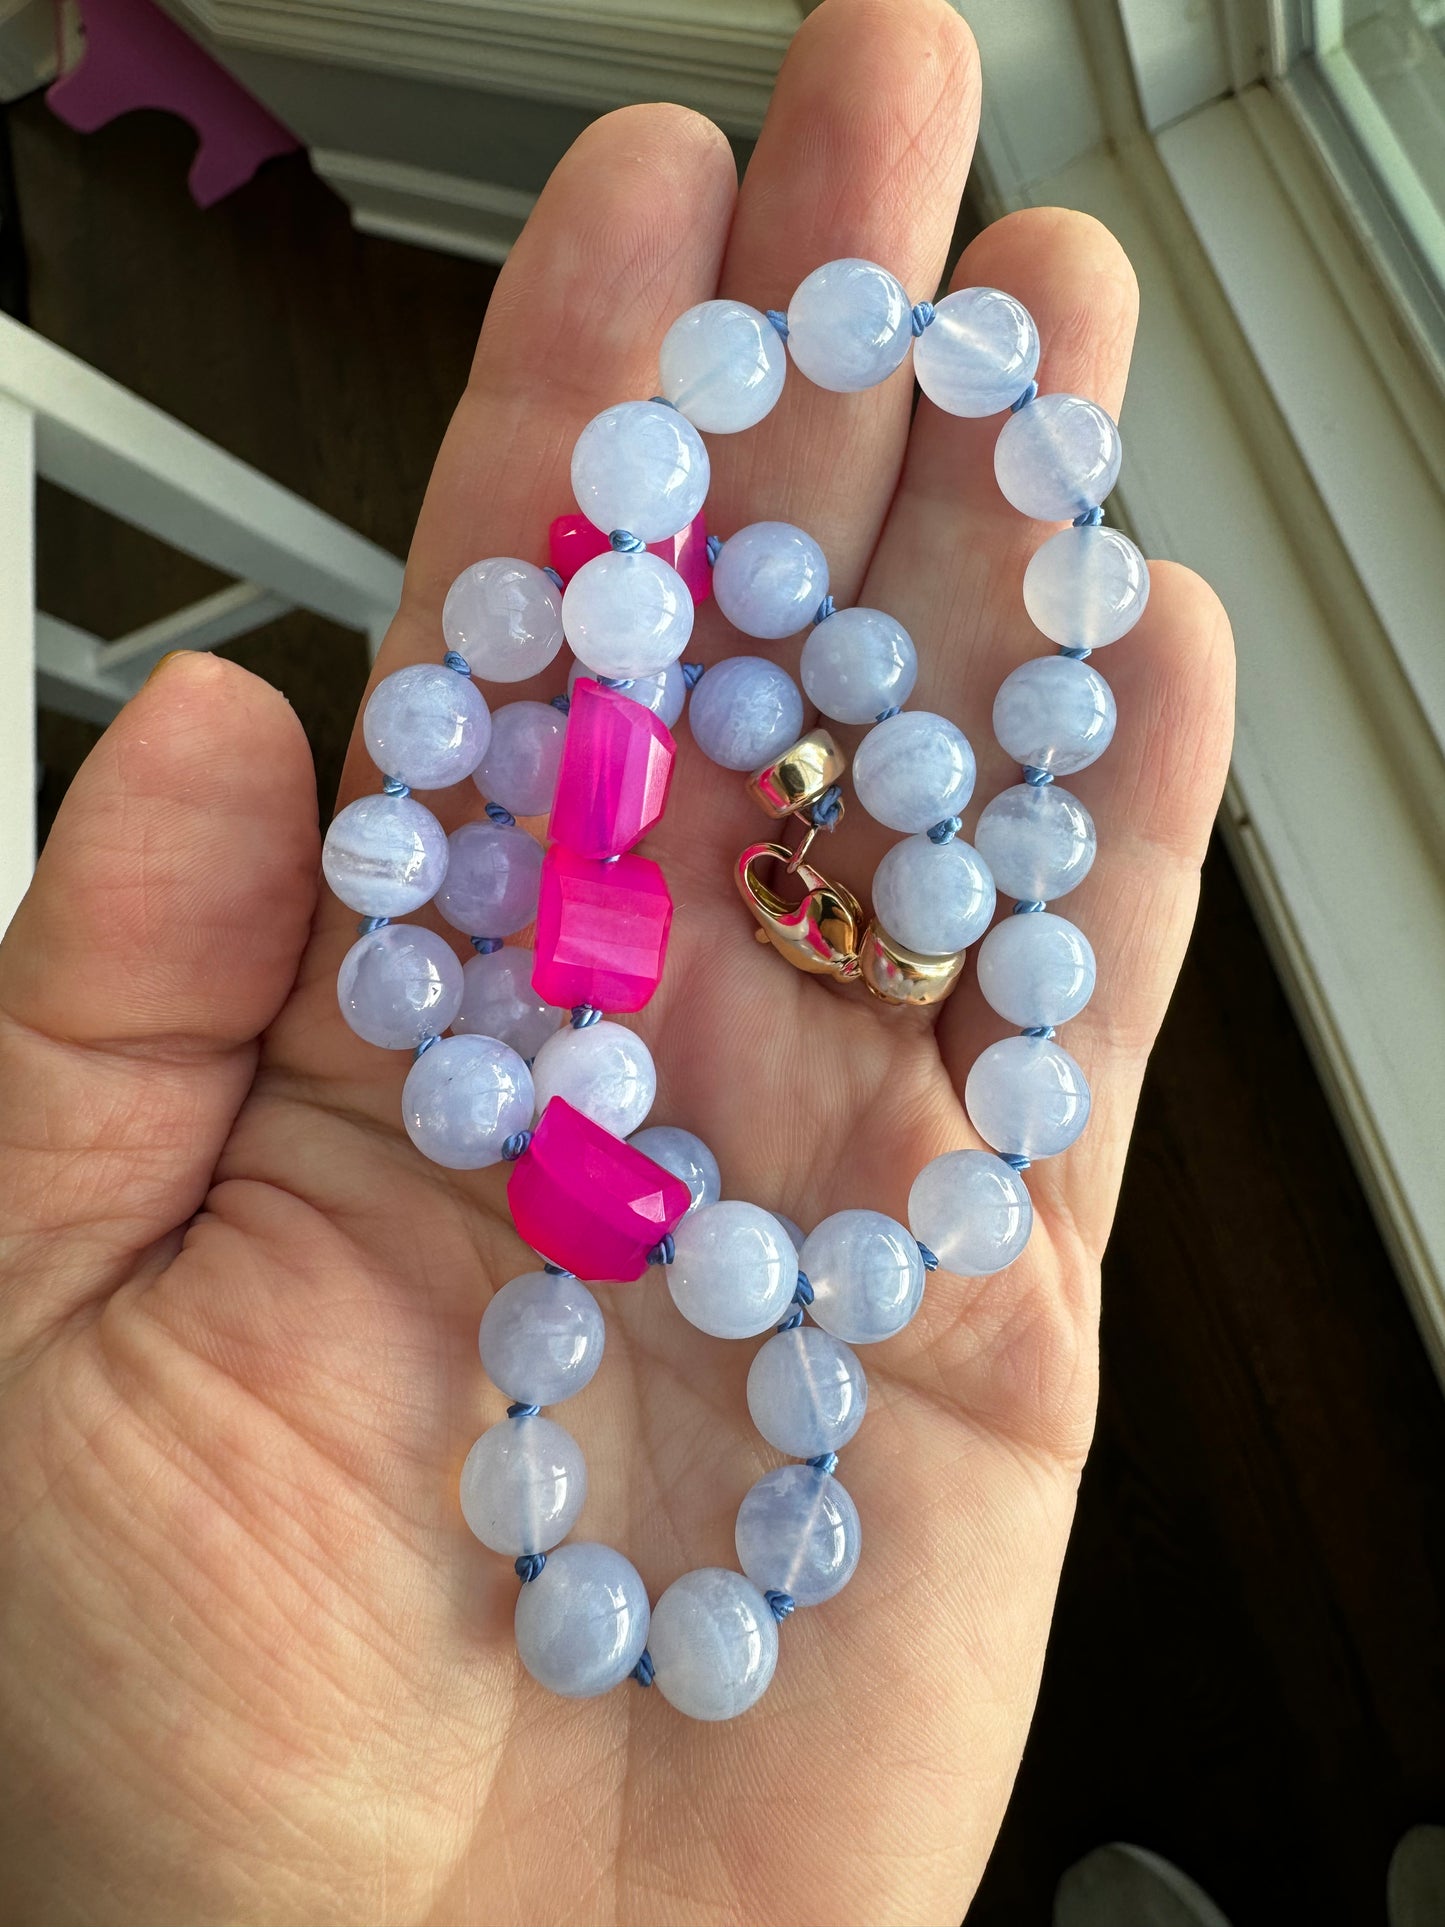 Chalcedony hand knotted necklace